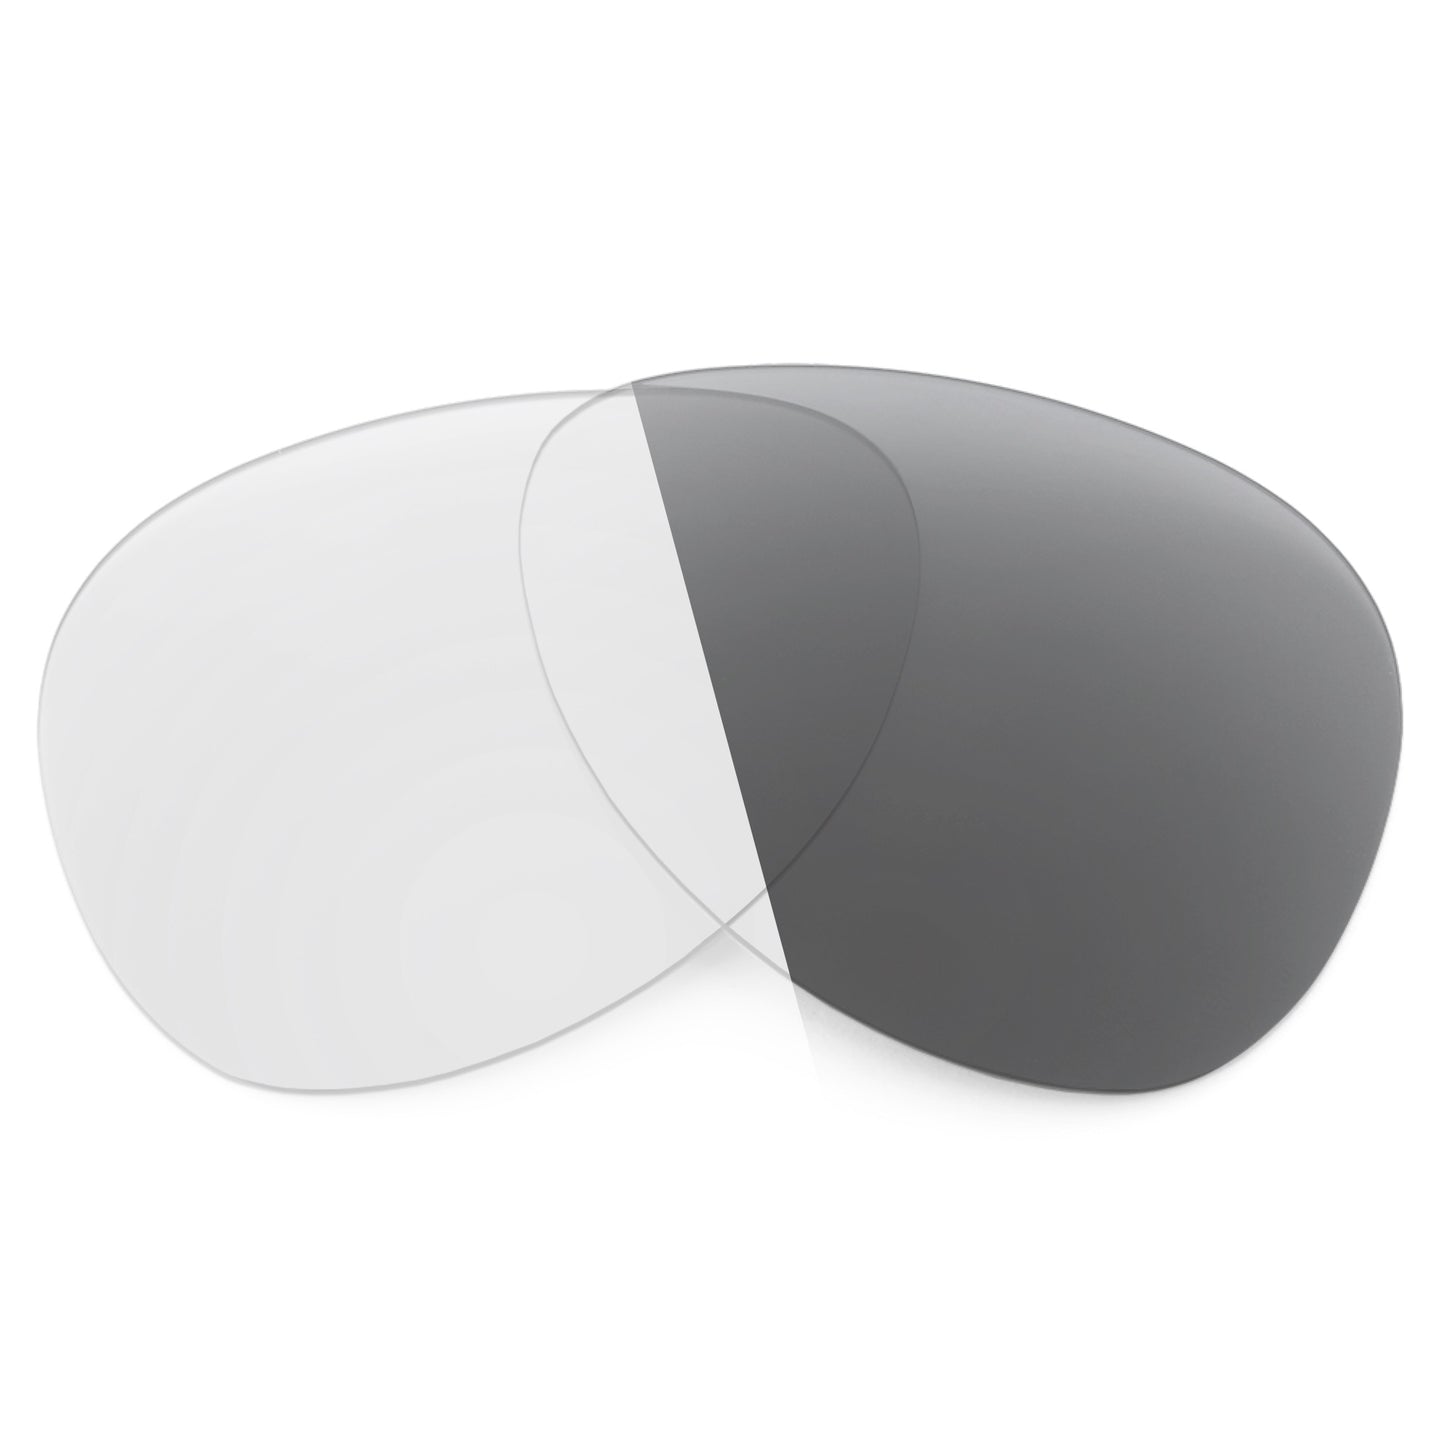 Revant replacement lenses for Ray-Ban RB3267 64mm Non-Polarized Adapt Gray Photochromic